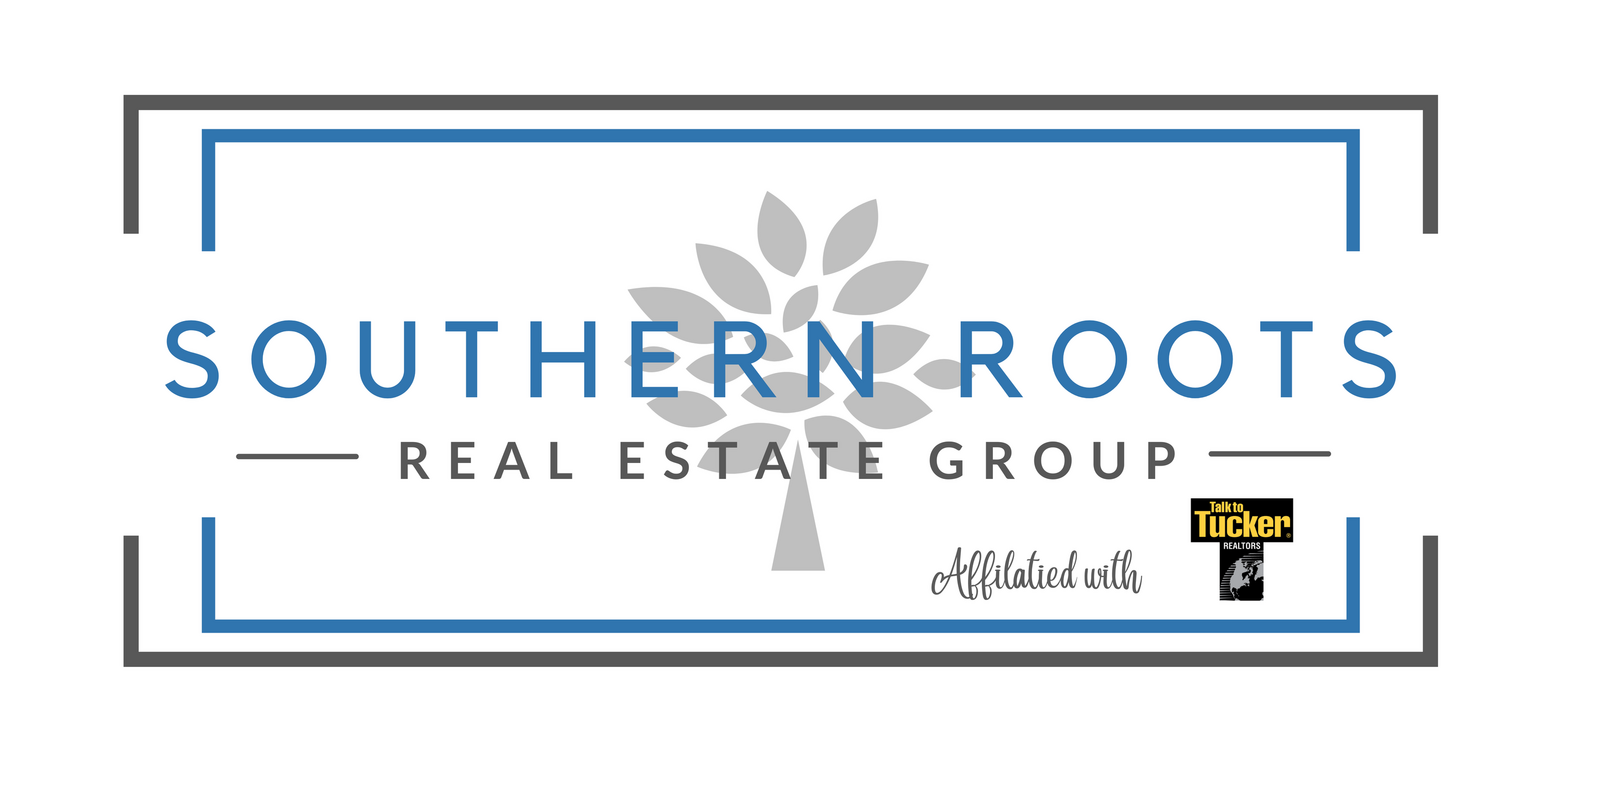 Southern Roots Real Estate Group | Multimedia Strategics Client